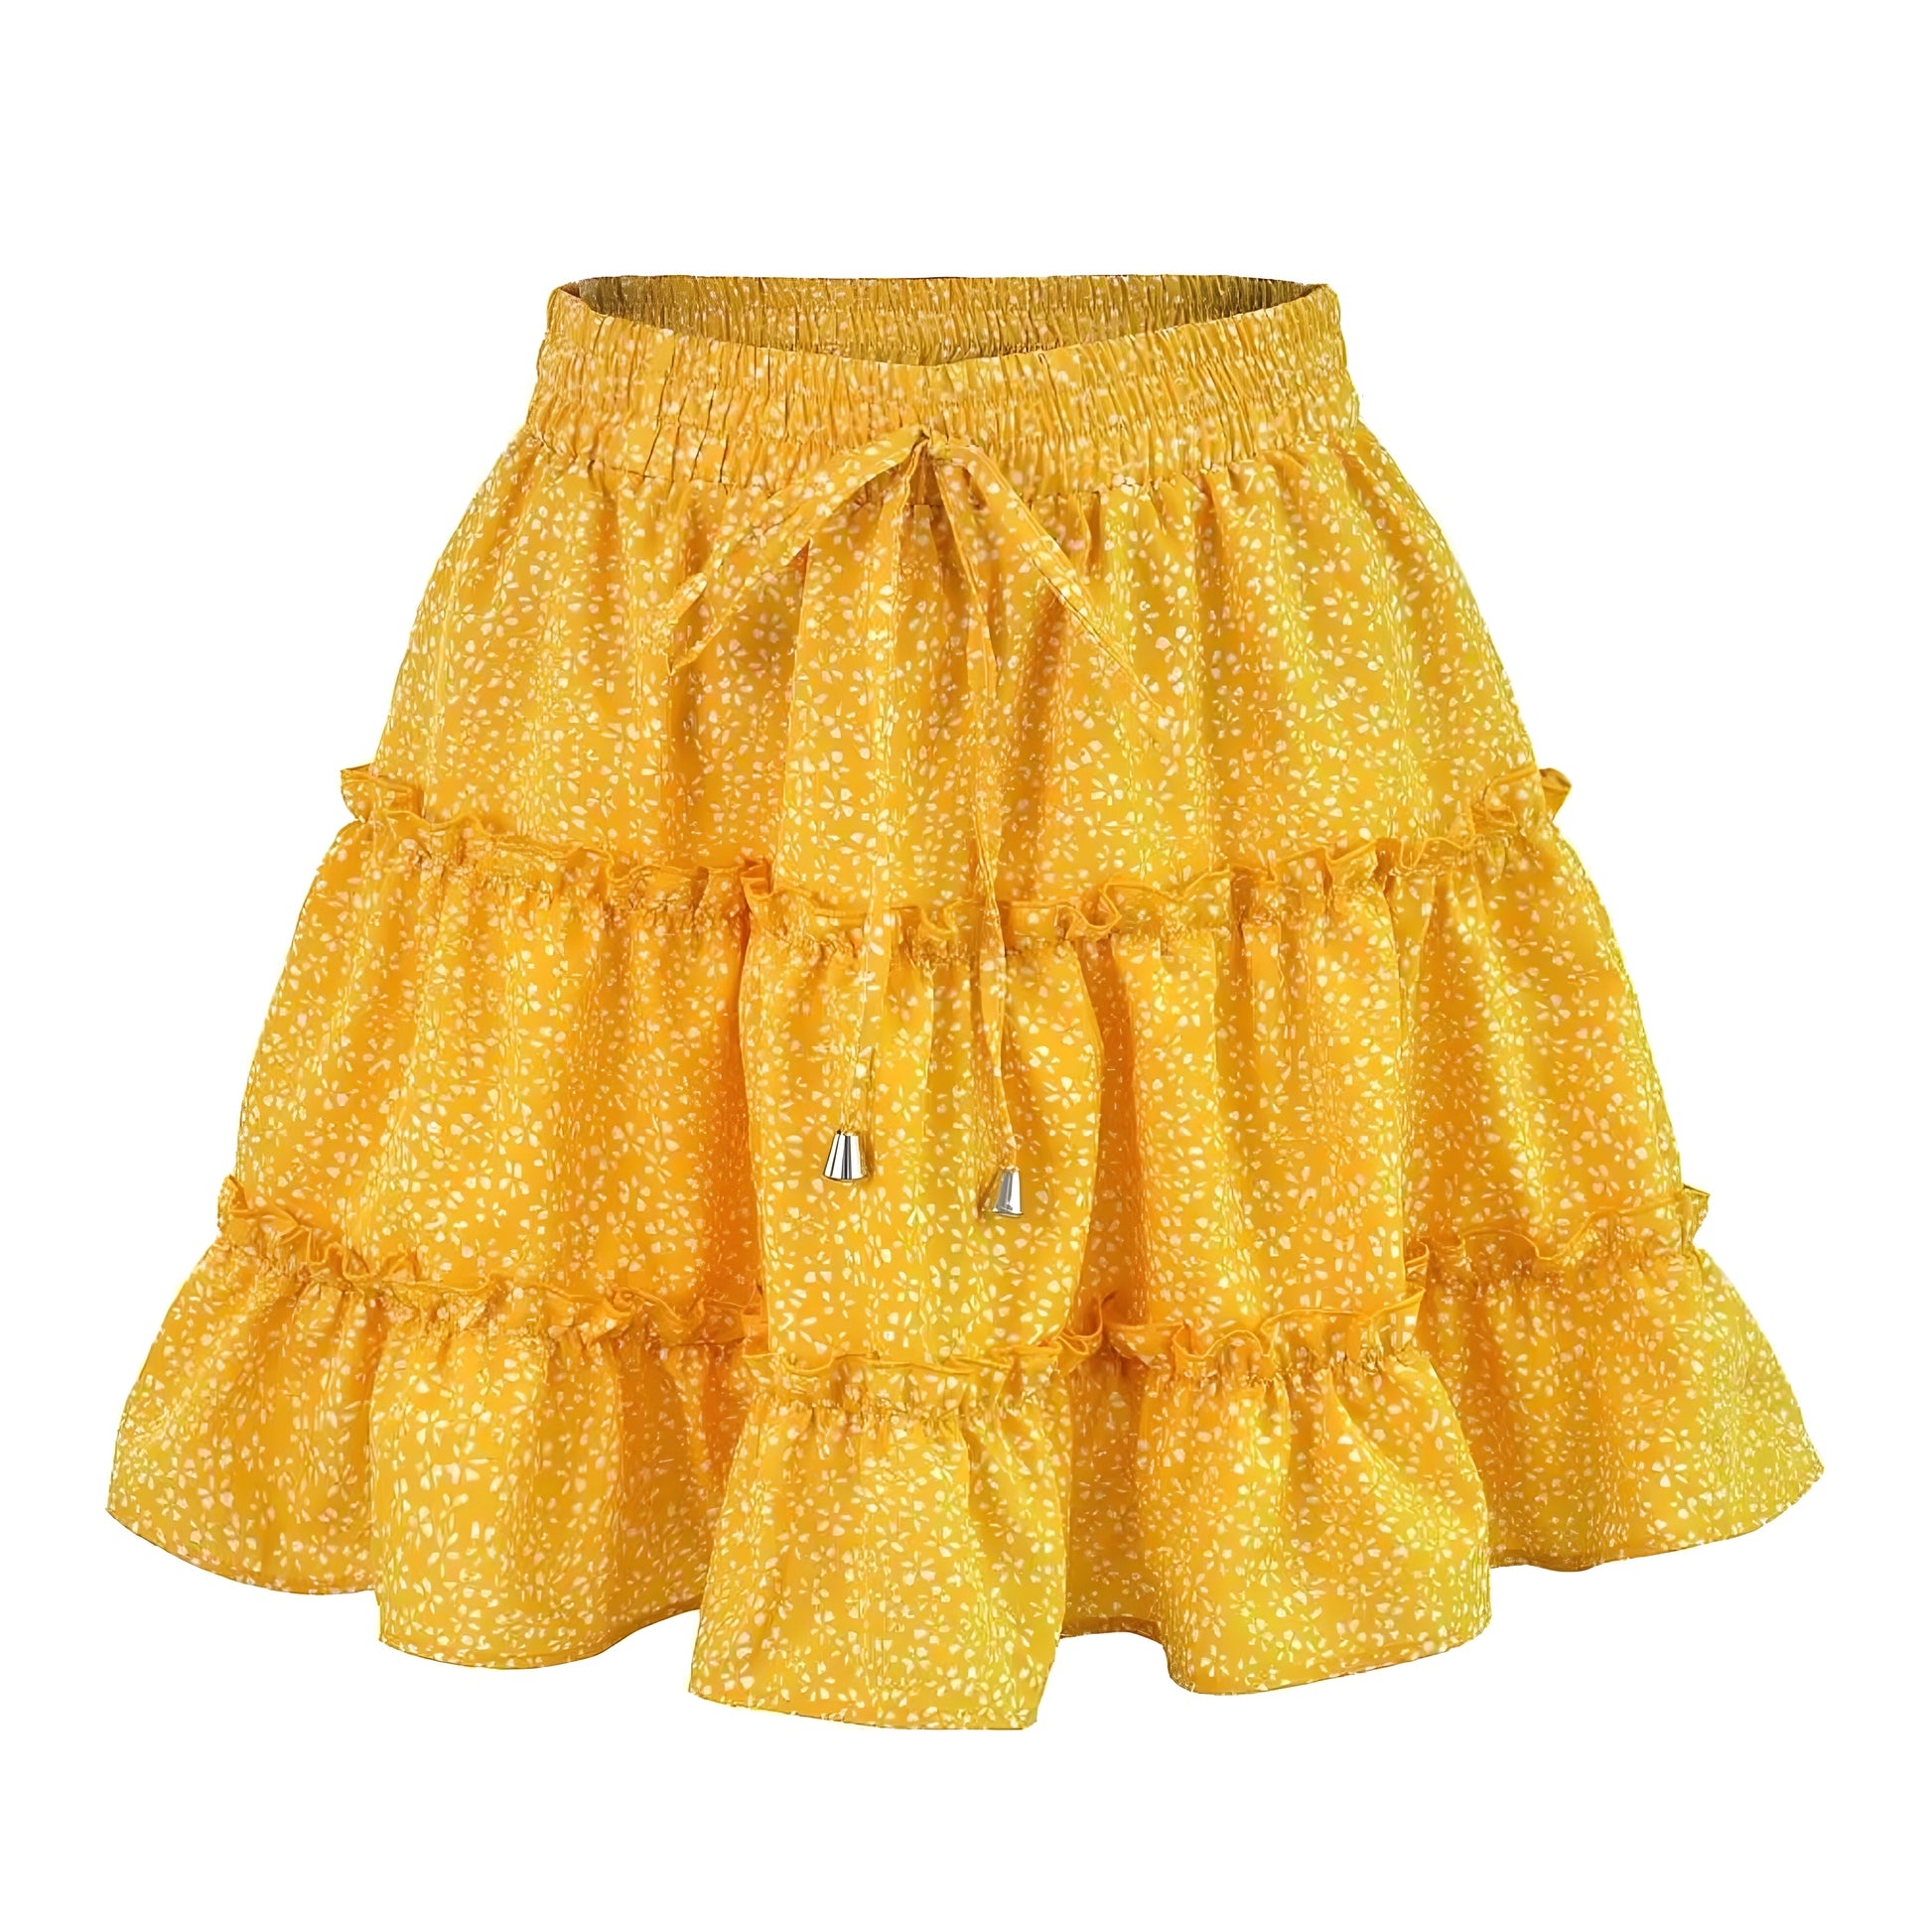 floral-print-yellow-and-white-hibiscus-flower-patterned-layered-ruffle-trim-draw-string-tie-fitted-waist-smocked-mid-high-rise-waisted-flowy-boho-tullie-linen-tiered-short-mini-skirt-women-ladies-chic-trendy-spring-2024-summer-elegant-casual-feminine-preppy-style-tropical-hawaiian-beach-wear-zara-altard-state-urban-outfitters-brandy-melville-princess-polly